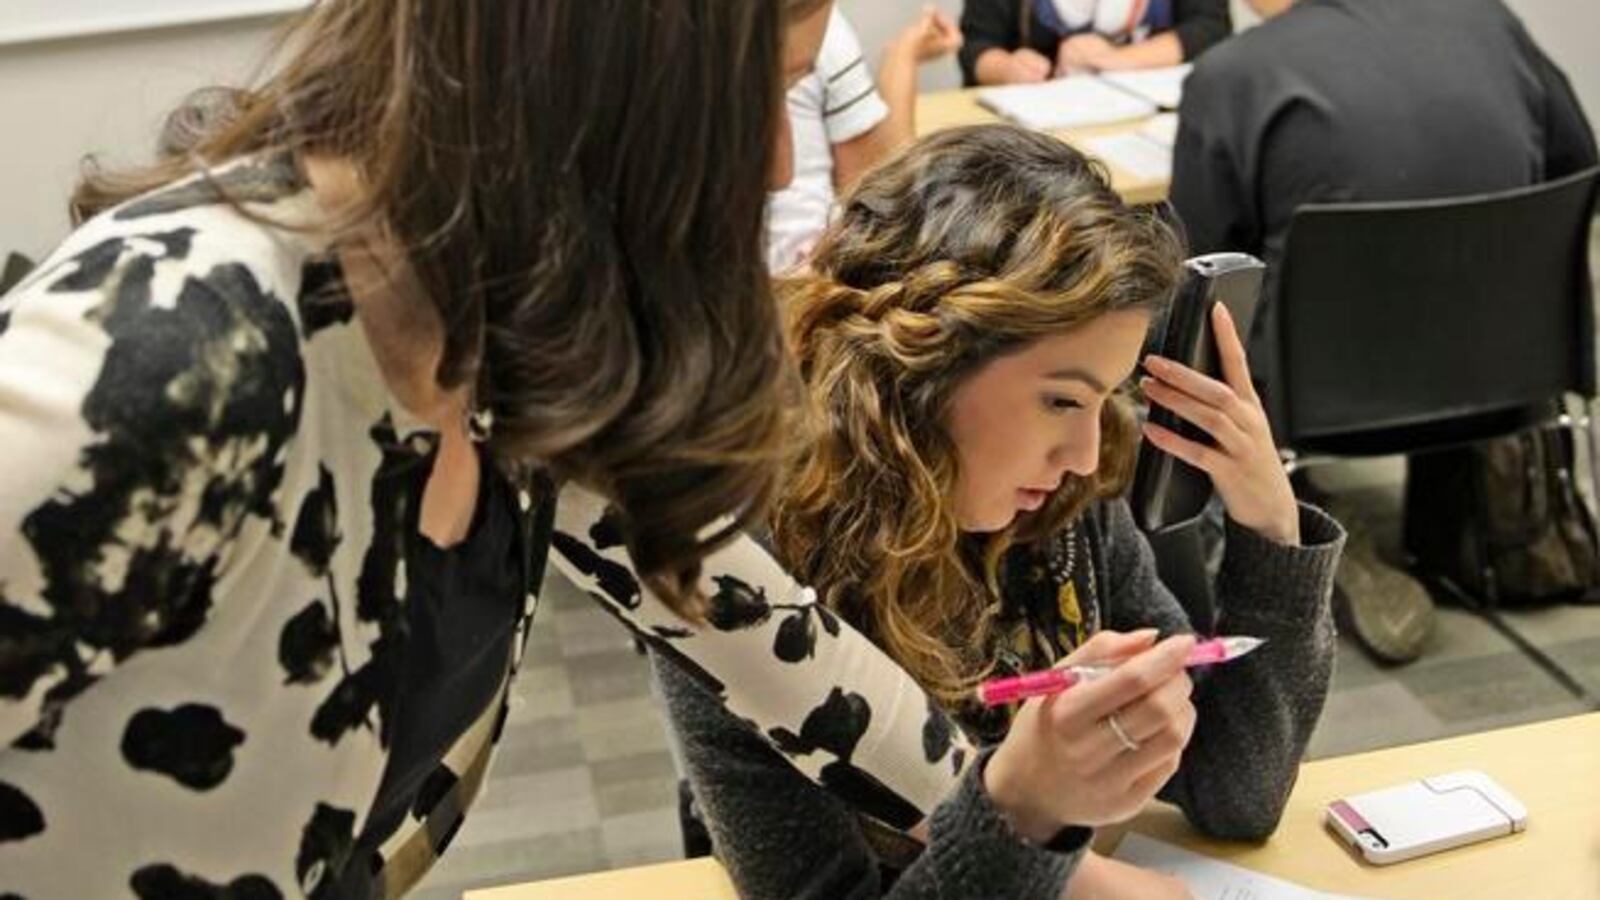 Math instructor Kellie Zolnikov, left, helps Kaitlin Carrasco, a student at Metro State University, during a math lab in 2014. Carrasco, 19, said she has always struggled in math, but scored high enough on her entrance exam to take the supplemental math lab she needs for a business management degree.